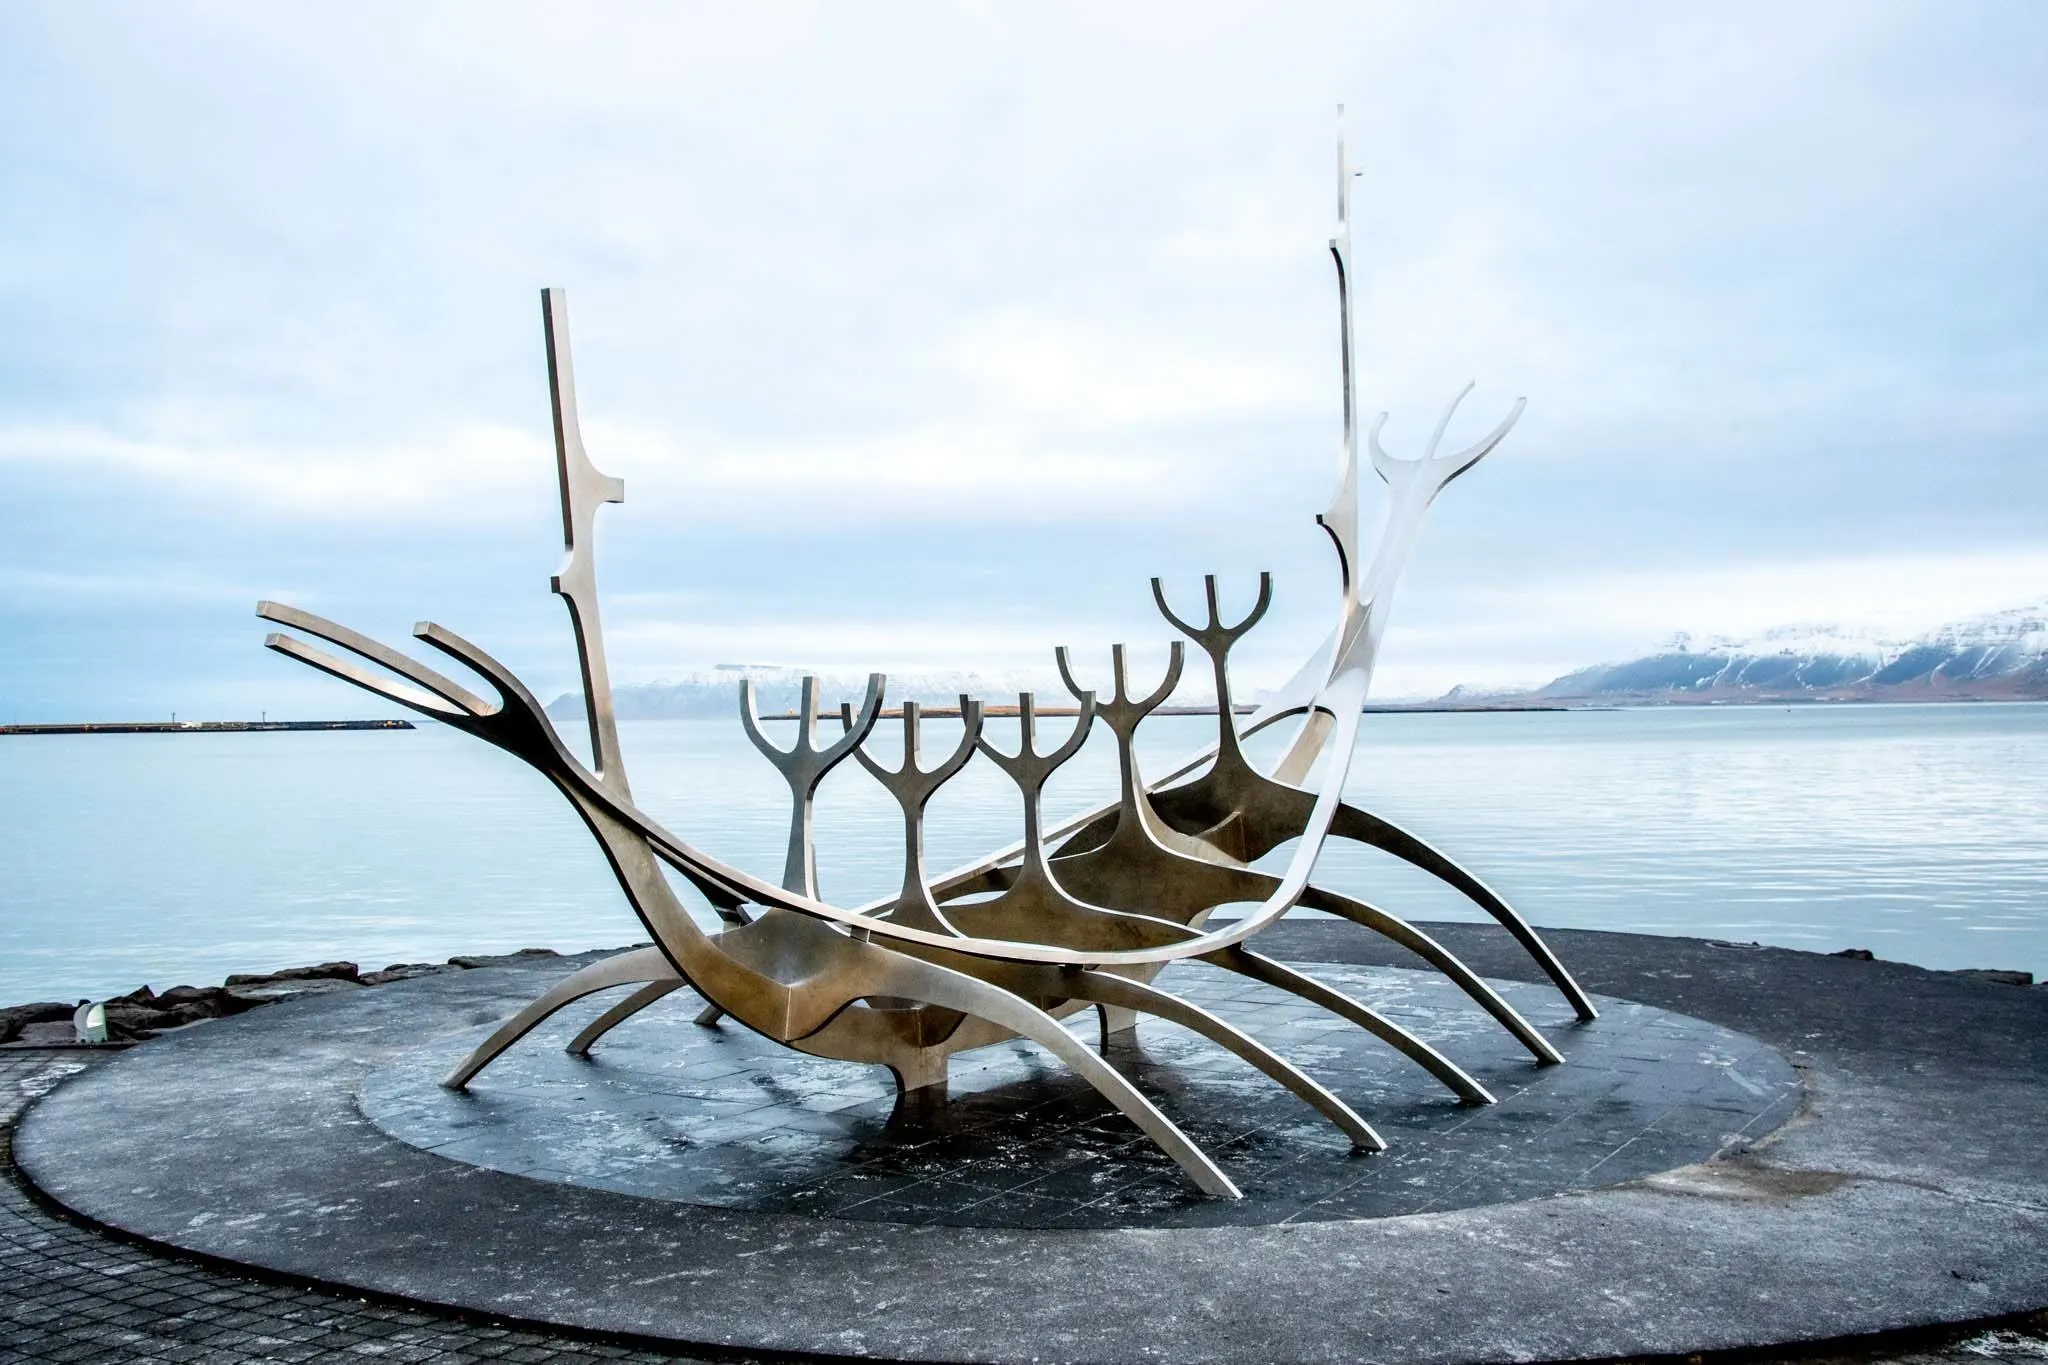 The steel Sun Voyager sculpture in Iceland